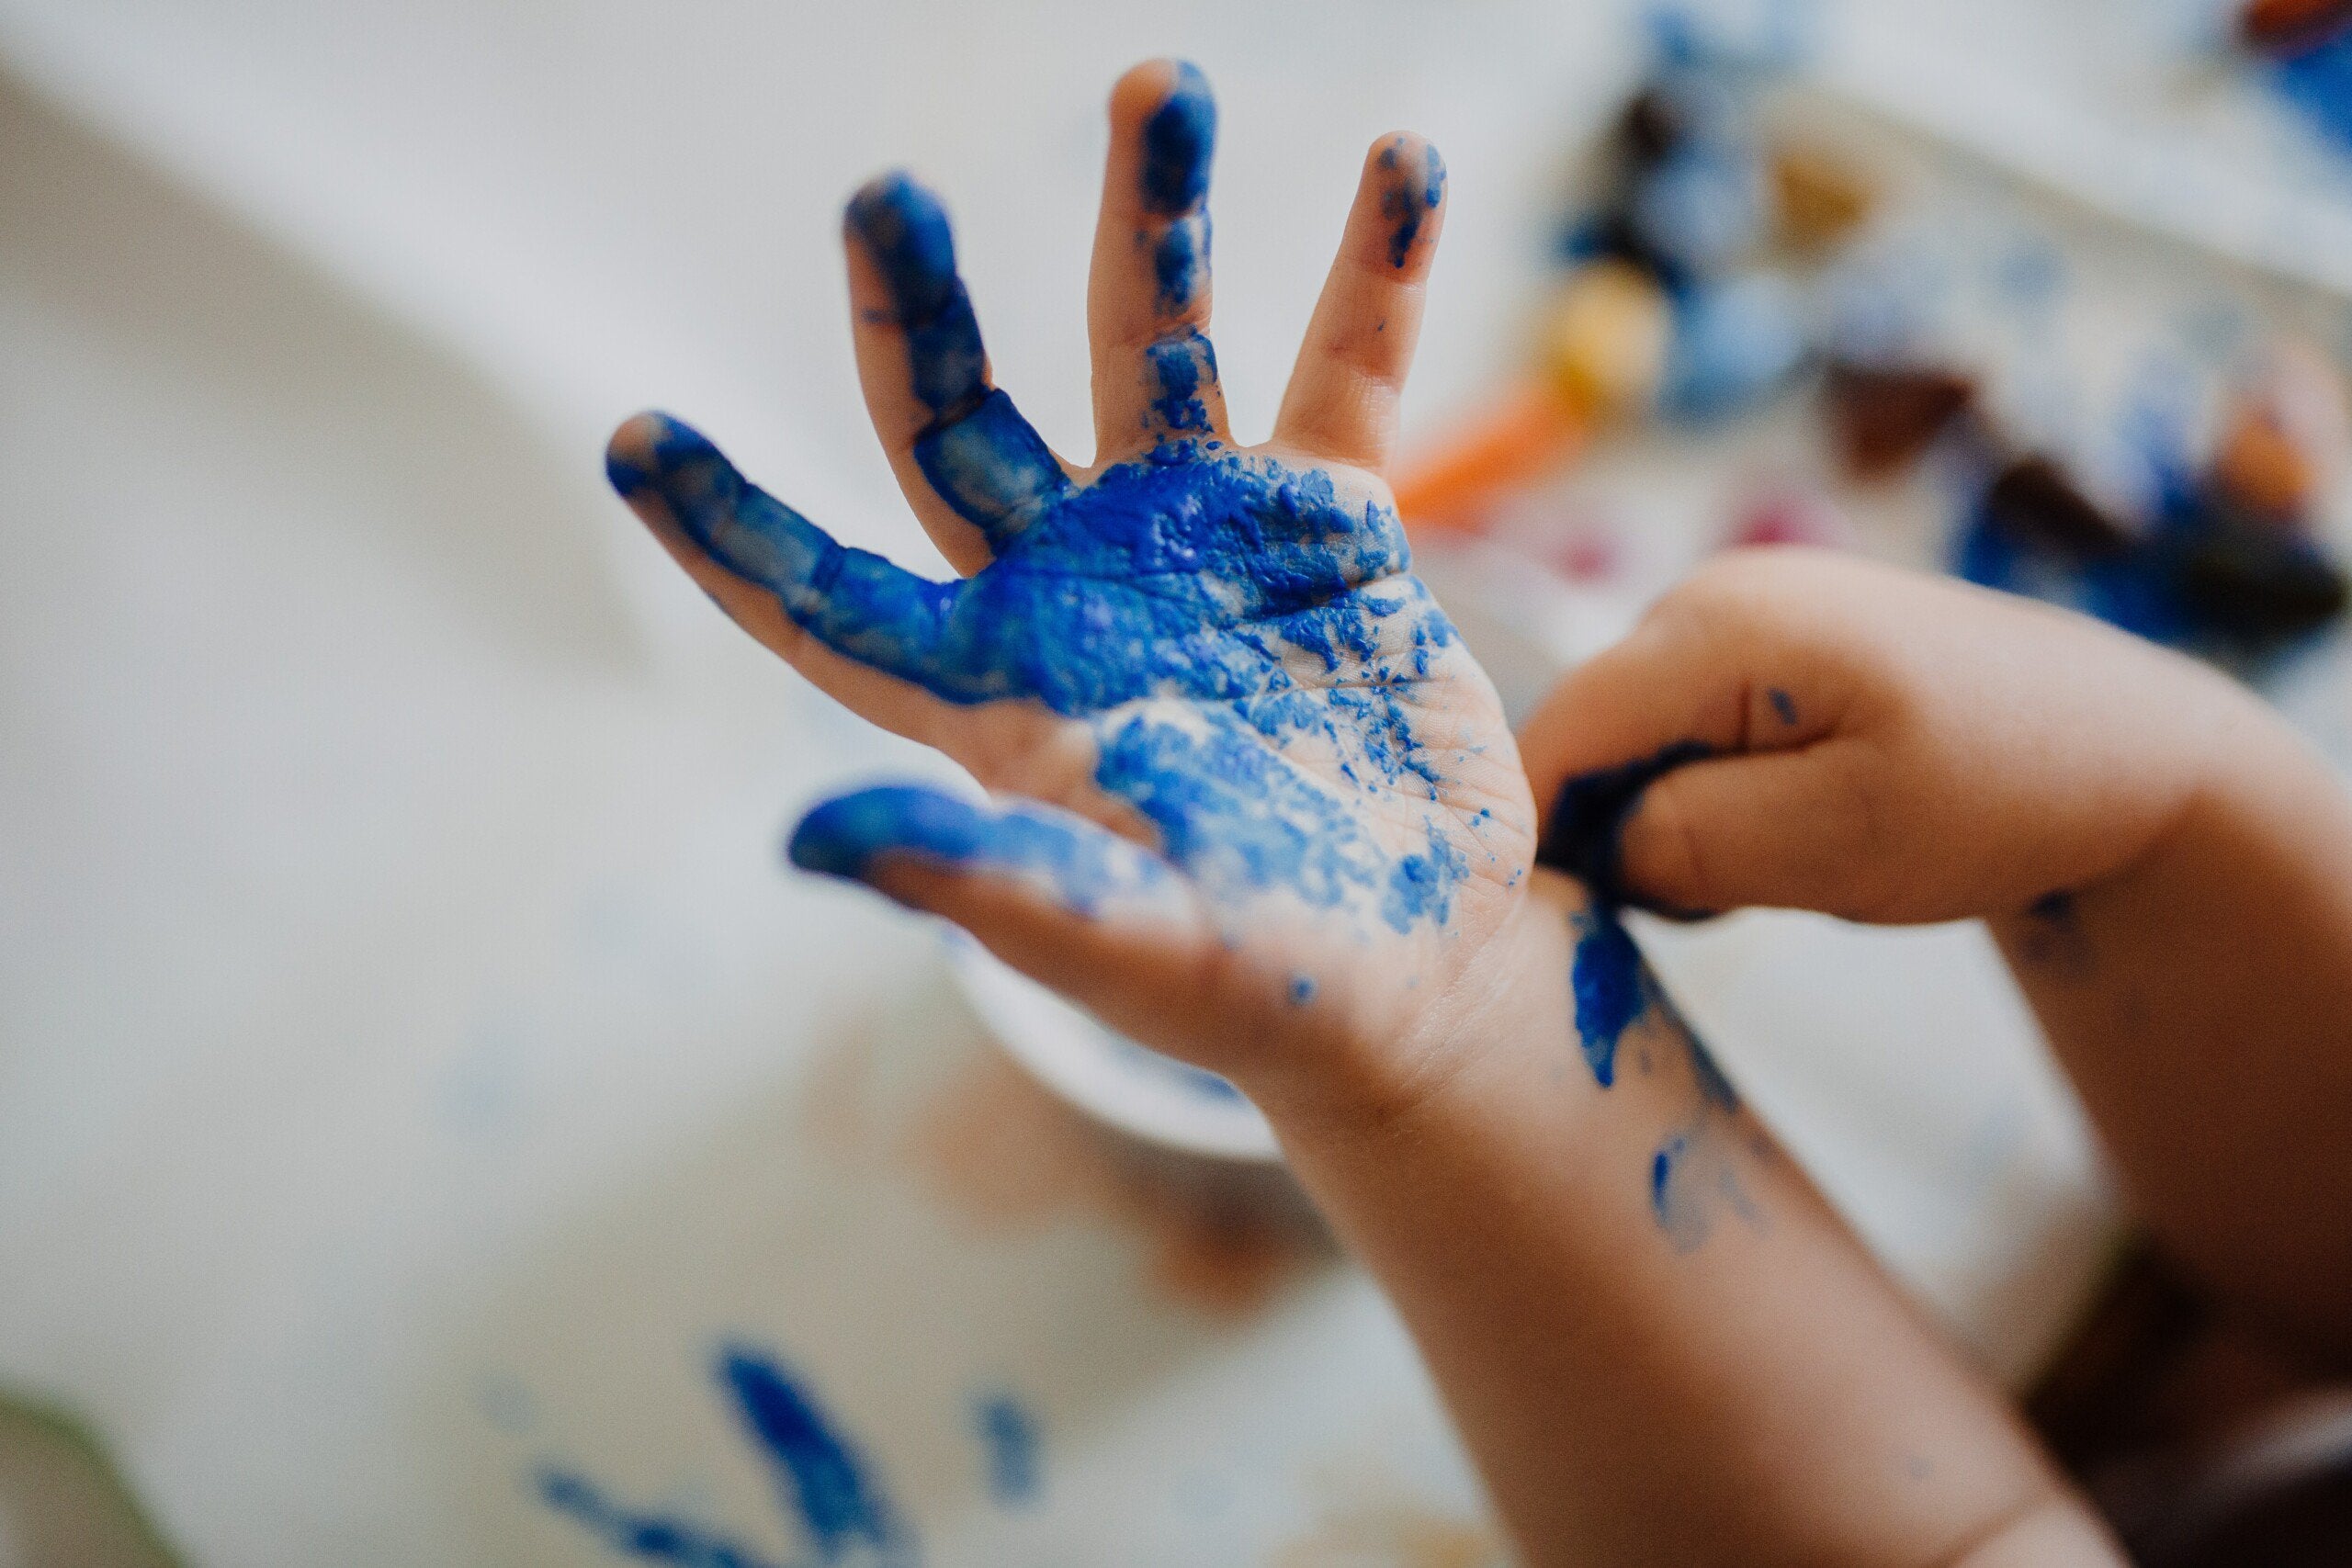 Hand of a child covered in blue paint